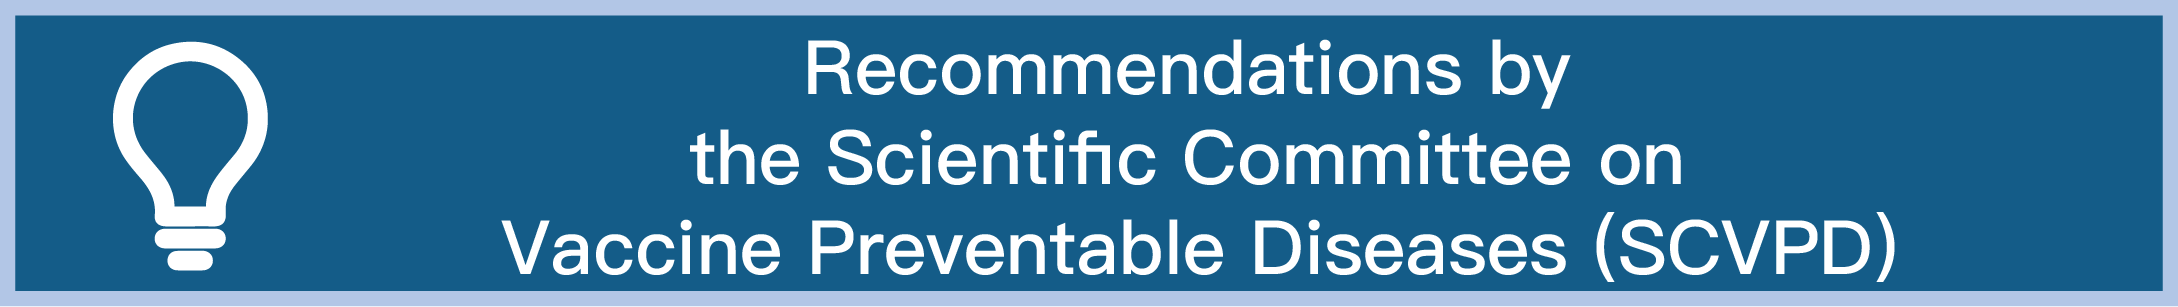 Recommendations by the Scientific Committee on Vaccine Preventable Diseases (SCVPD)